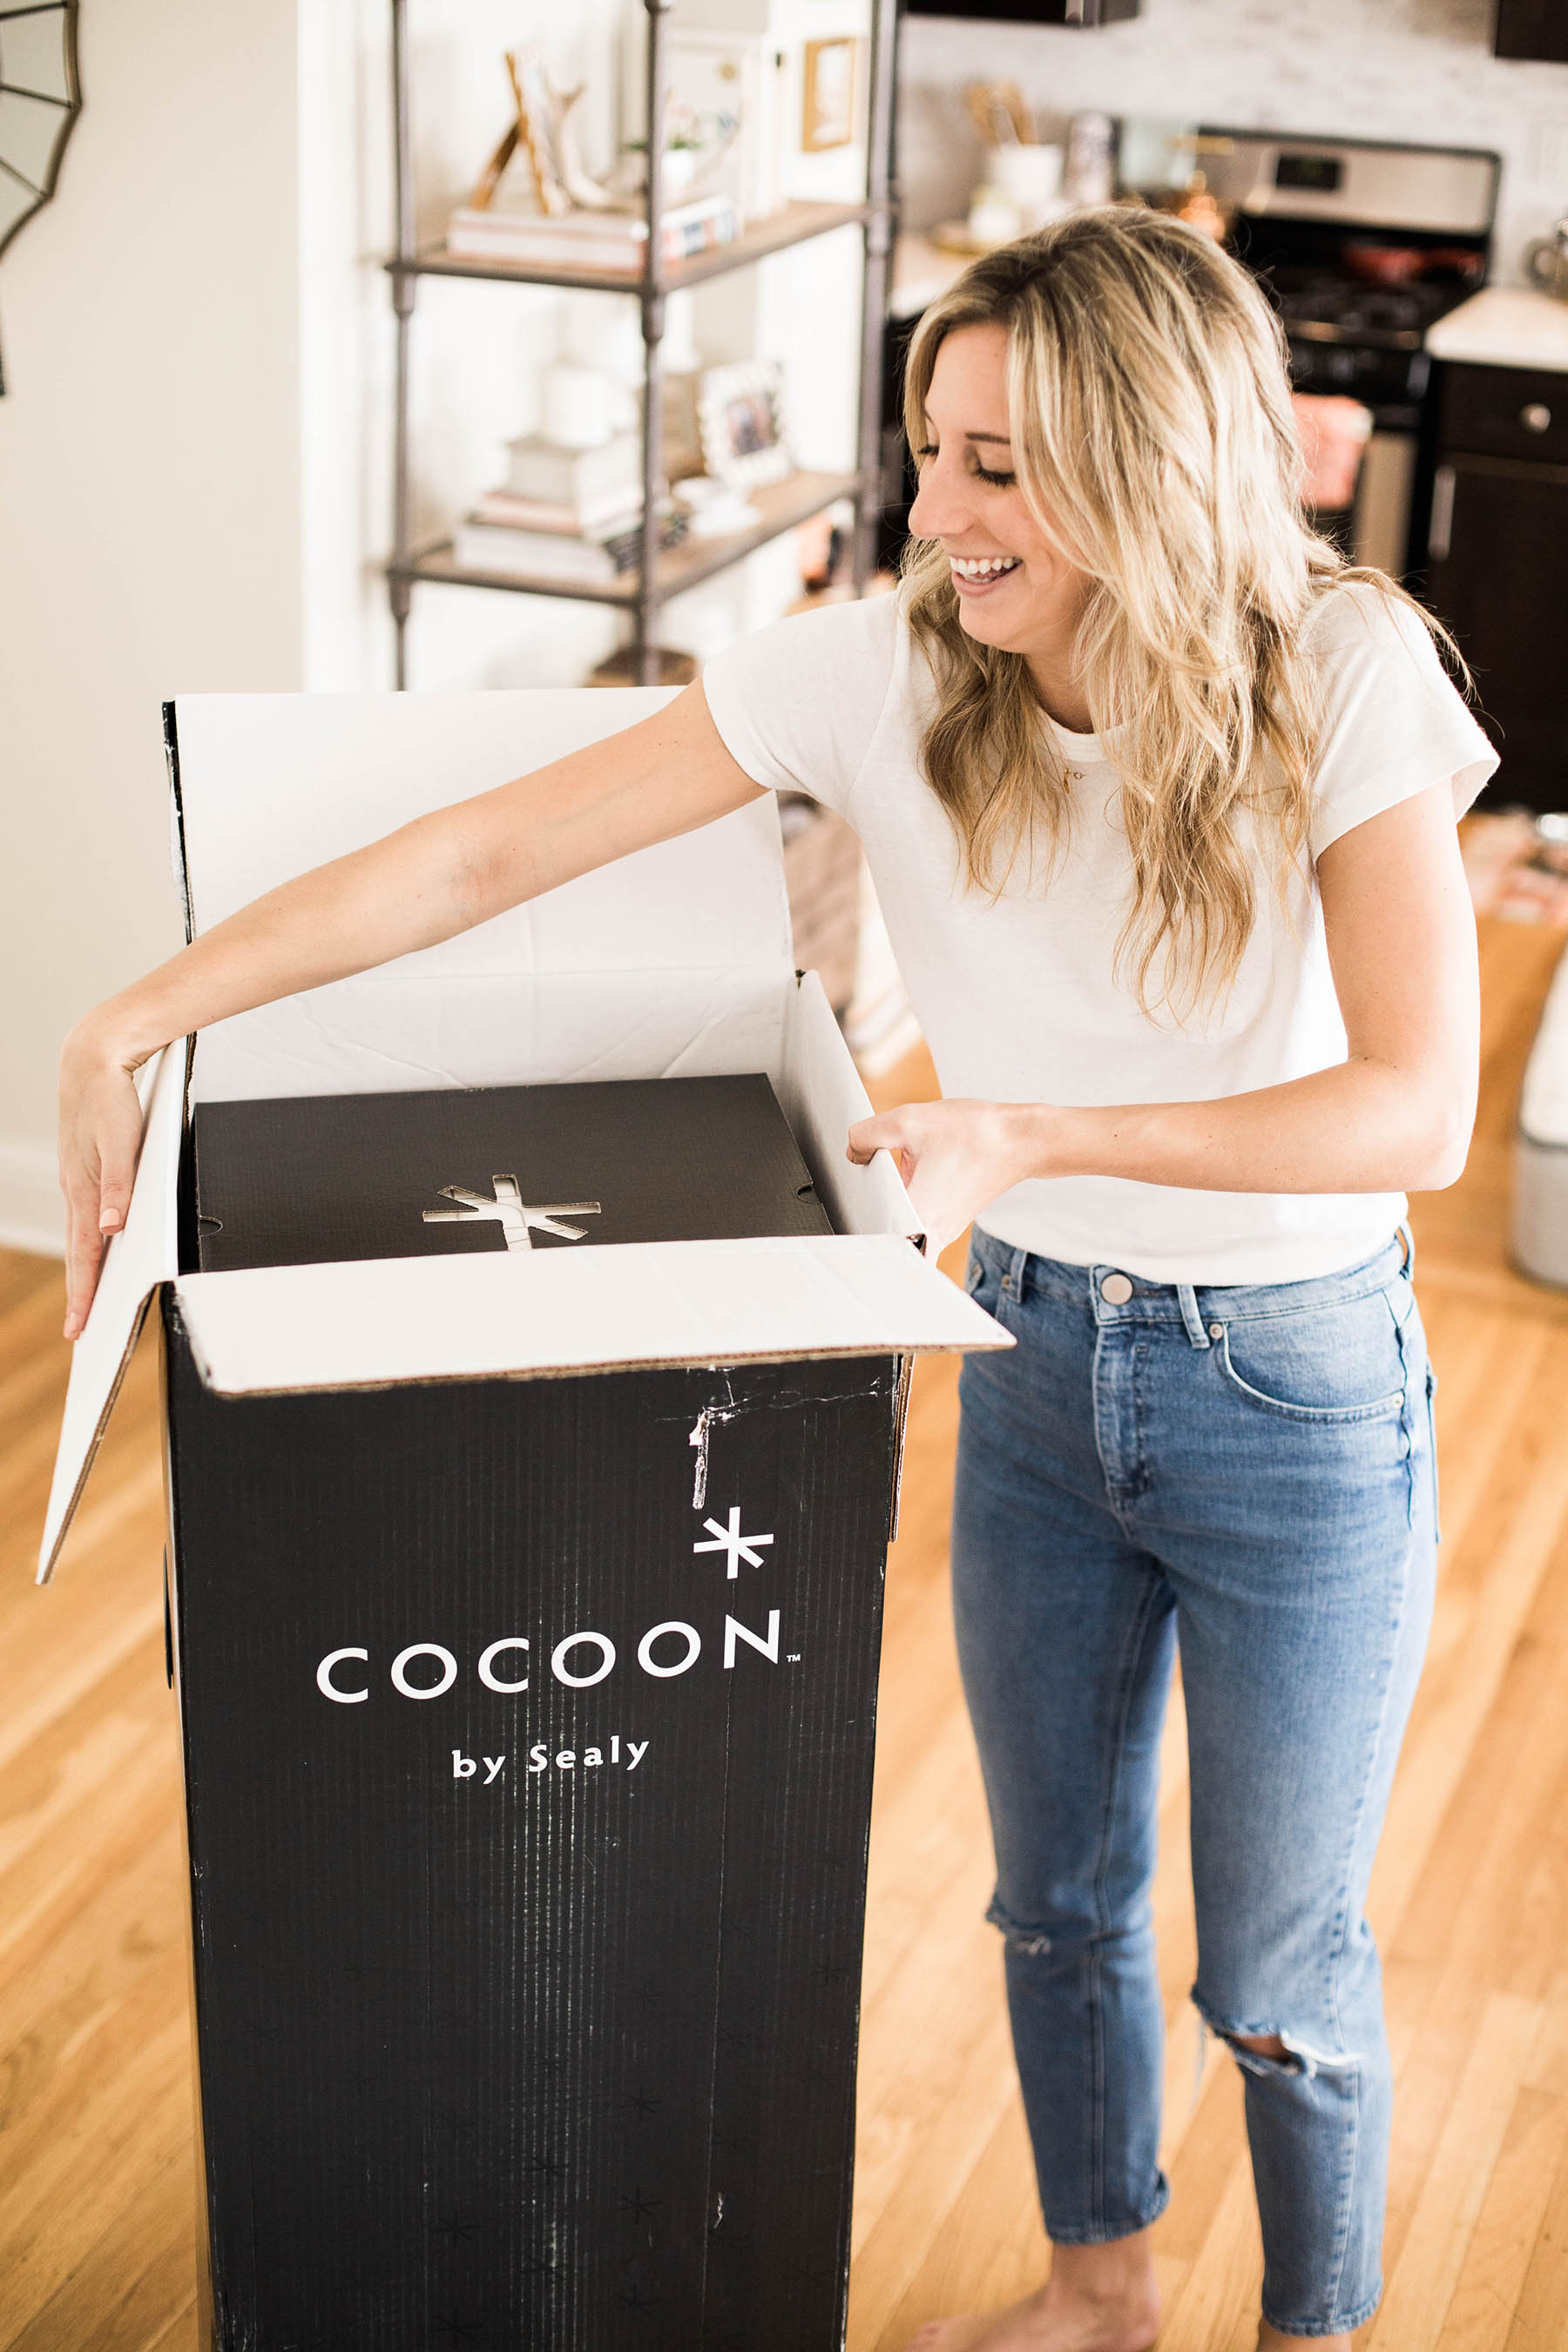 Amanda Holstein opening Cocoon by Sealy mattress delivery box